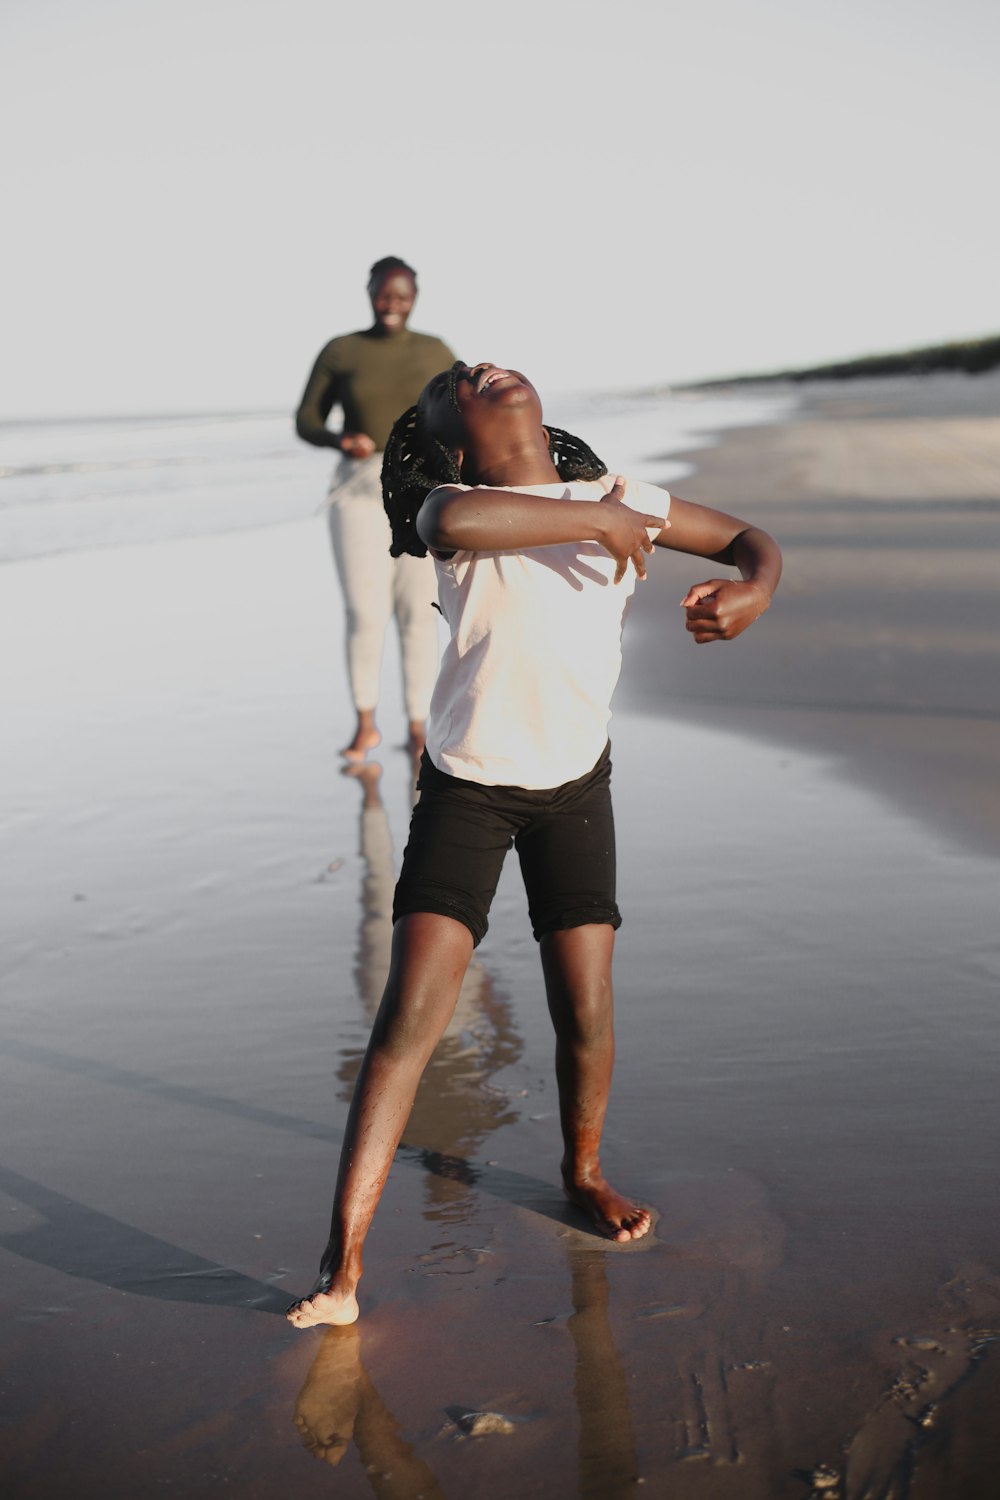 man in white shirt and black shorts running on beach during daytime